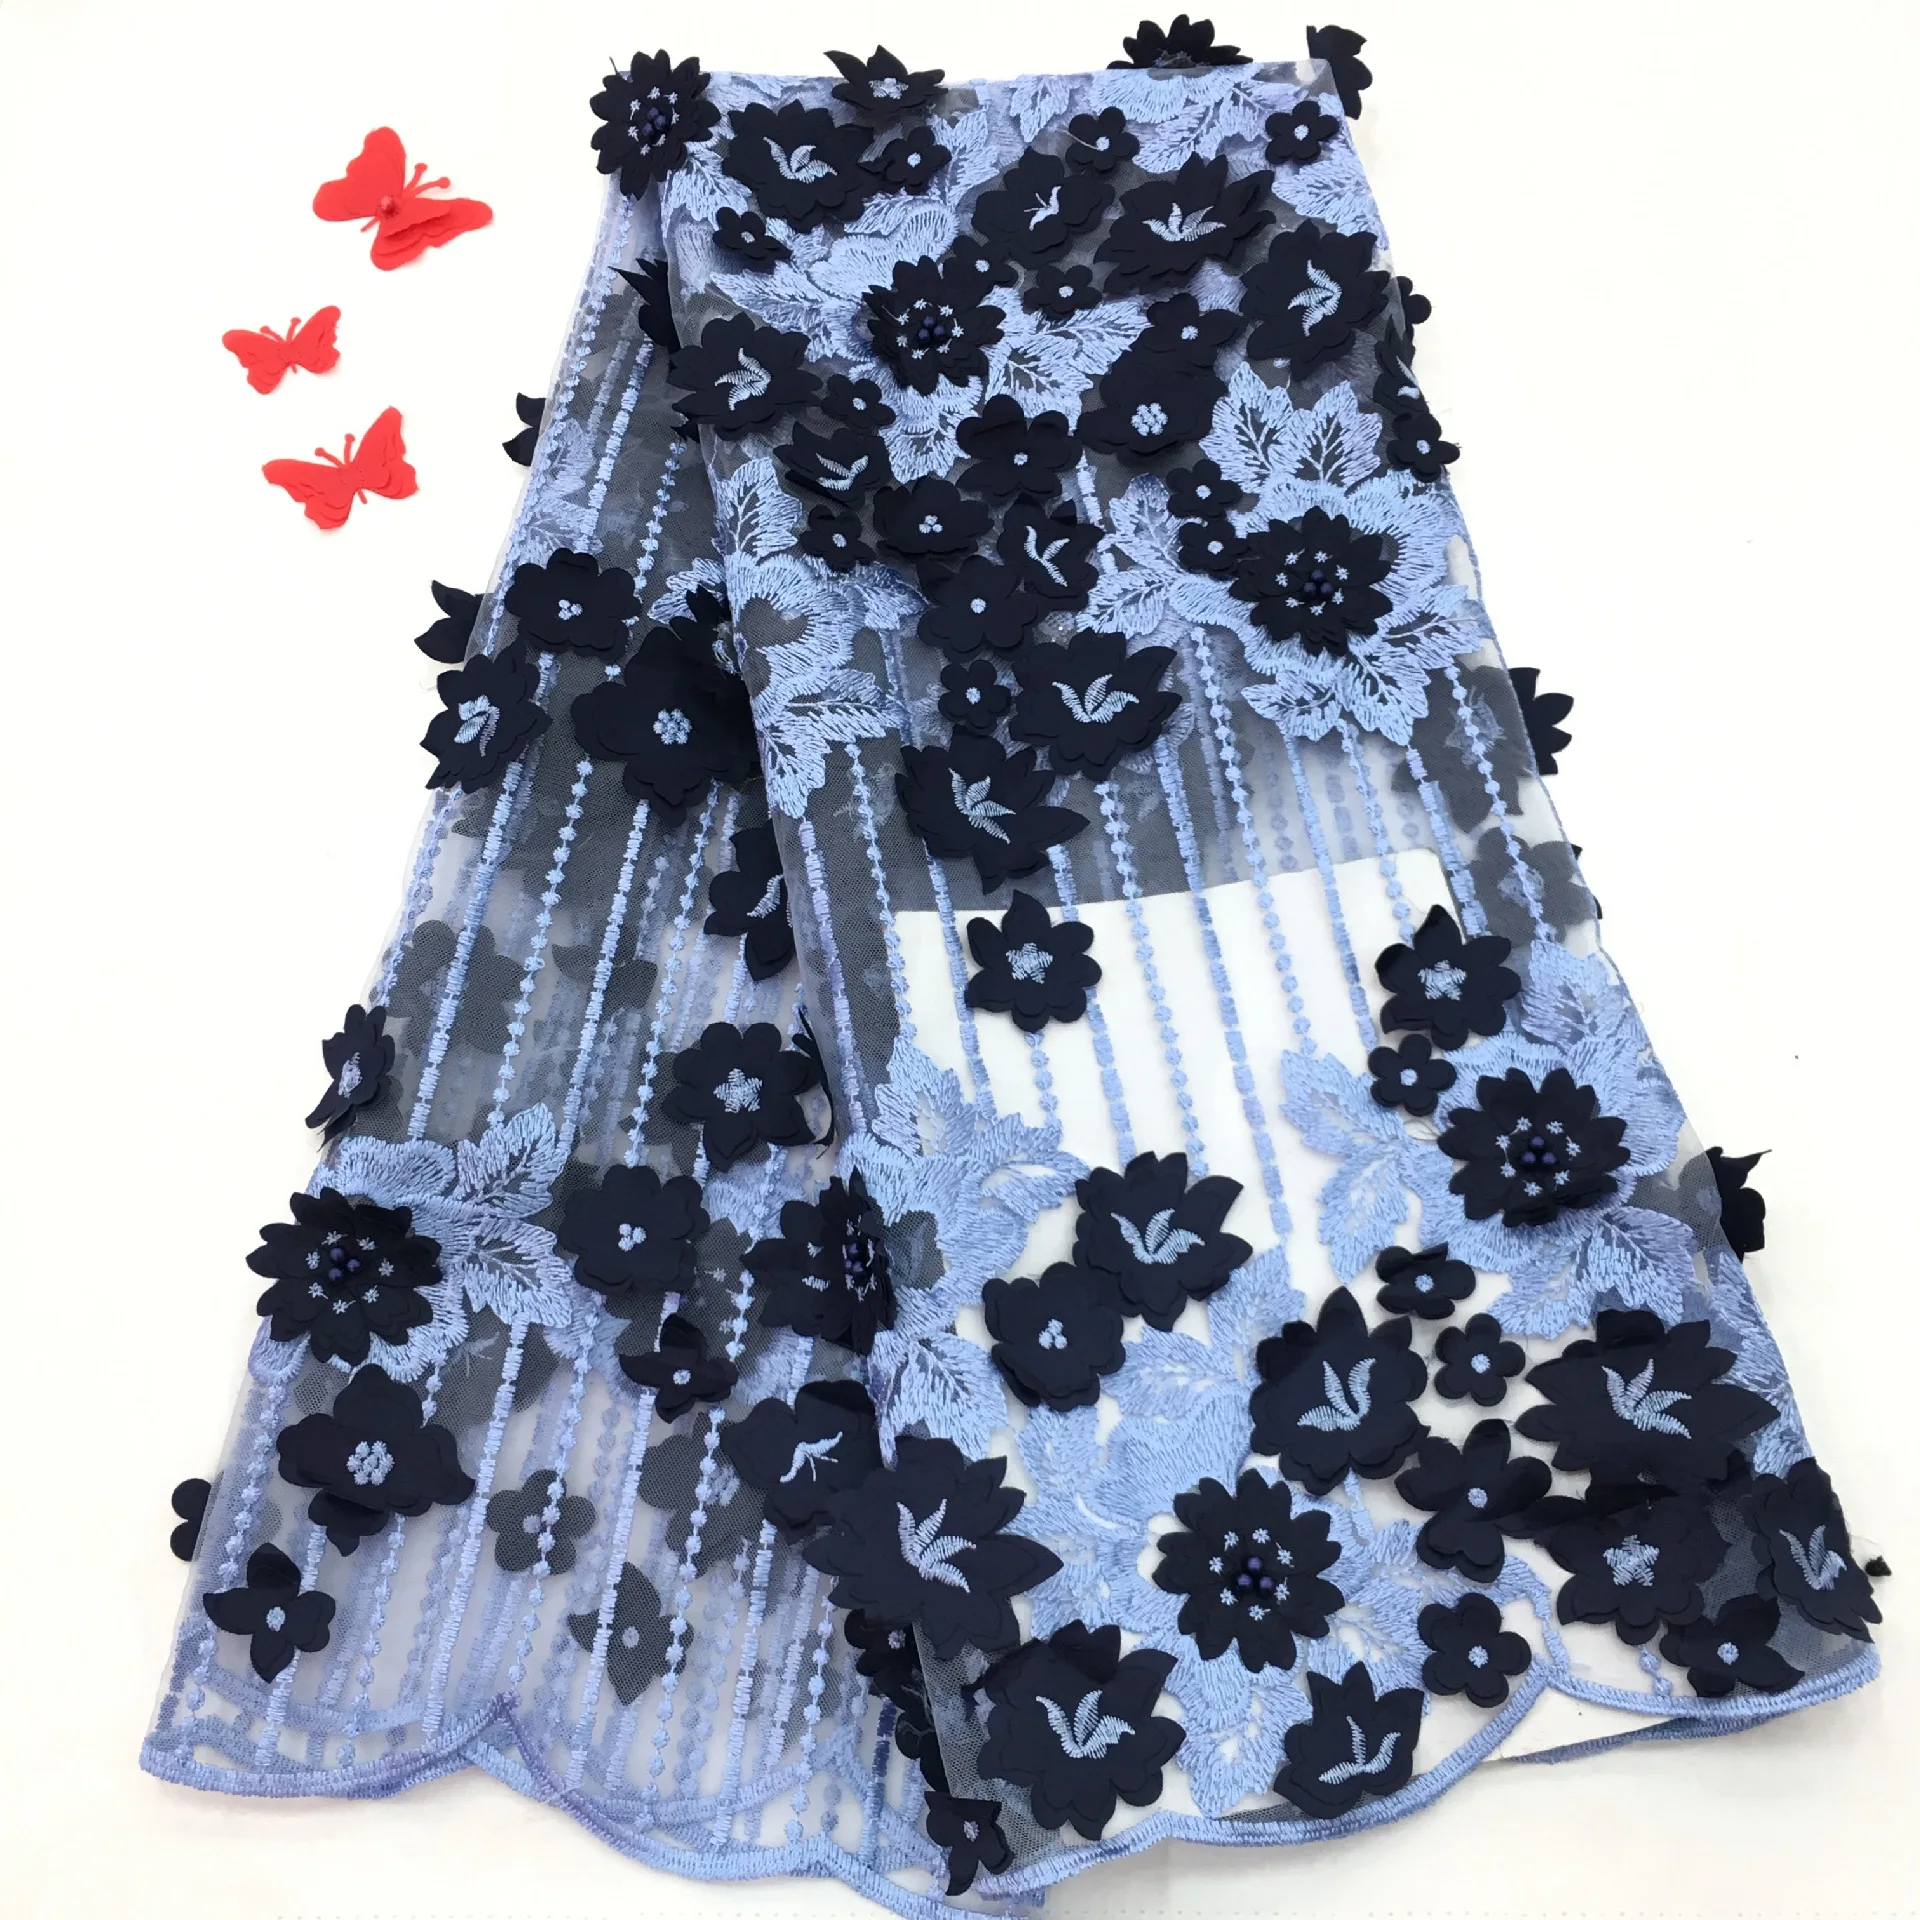 Latest African 3D Flowers Lace Fabric French Tulle Voile Beaded Lace Fabric For Wedding Party Nigerian Bridal Laces Fabric